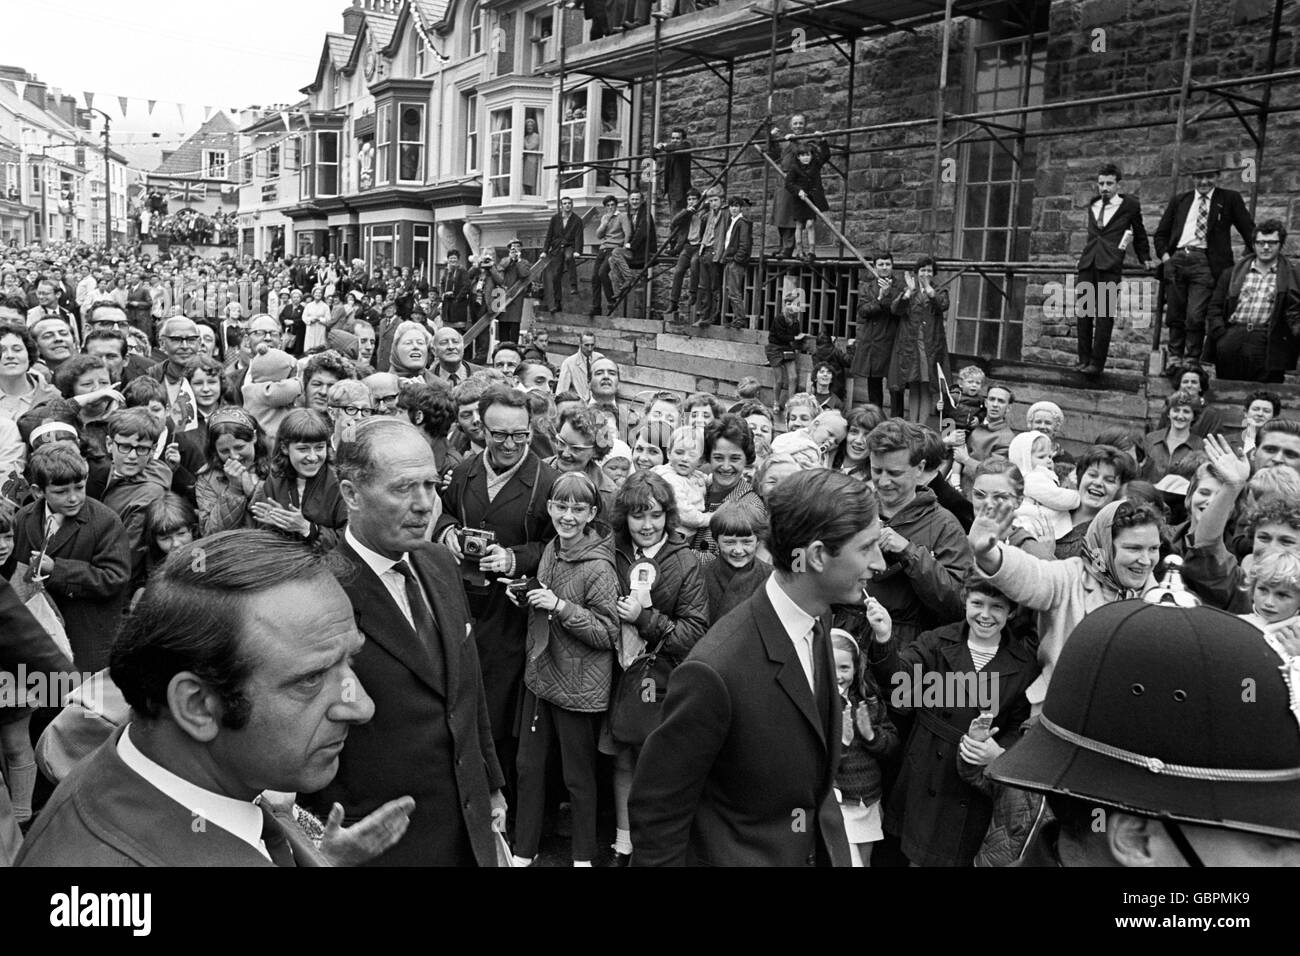 The Prince of Wales walking through crowded Queen's Square in Blaenau Festiniog, as he was given a smiling welcome by the townspeople, on the first day of his meet-the-people tour of Wales. Stock Photo